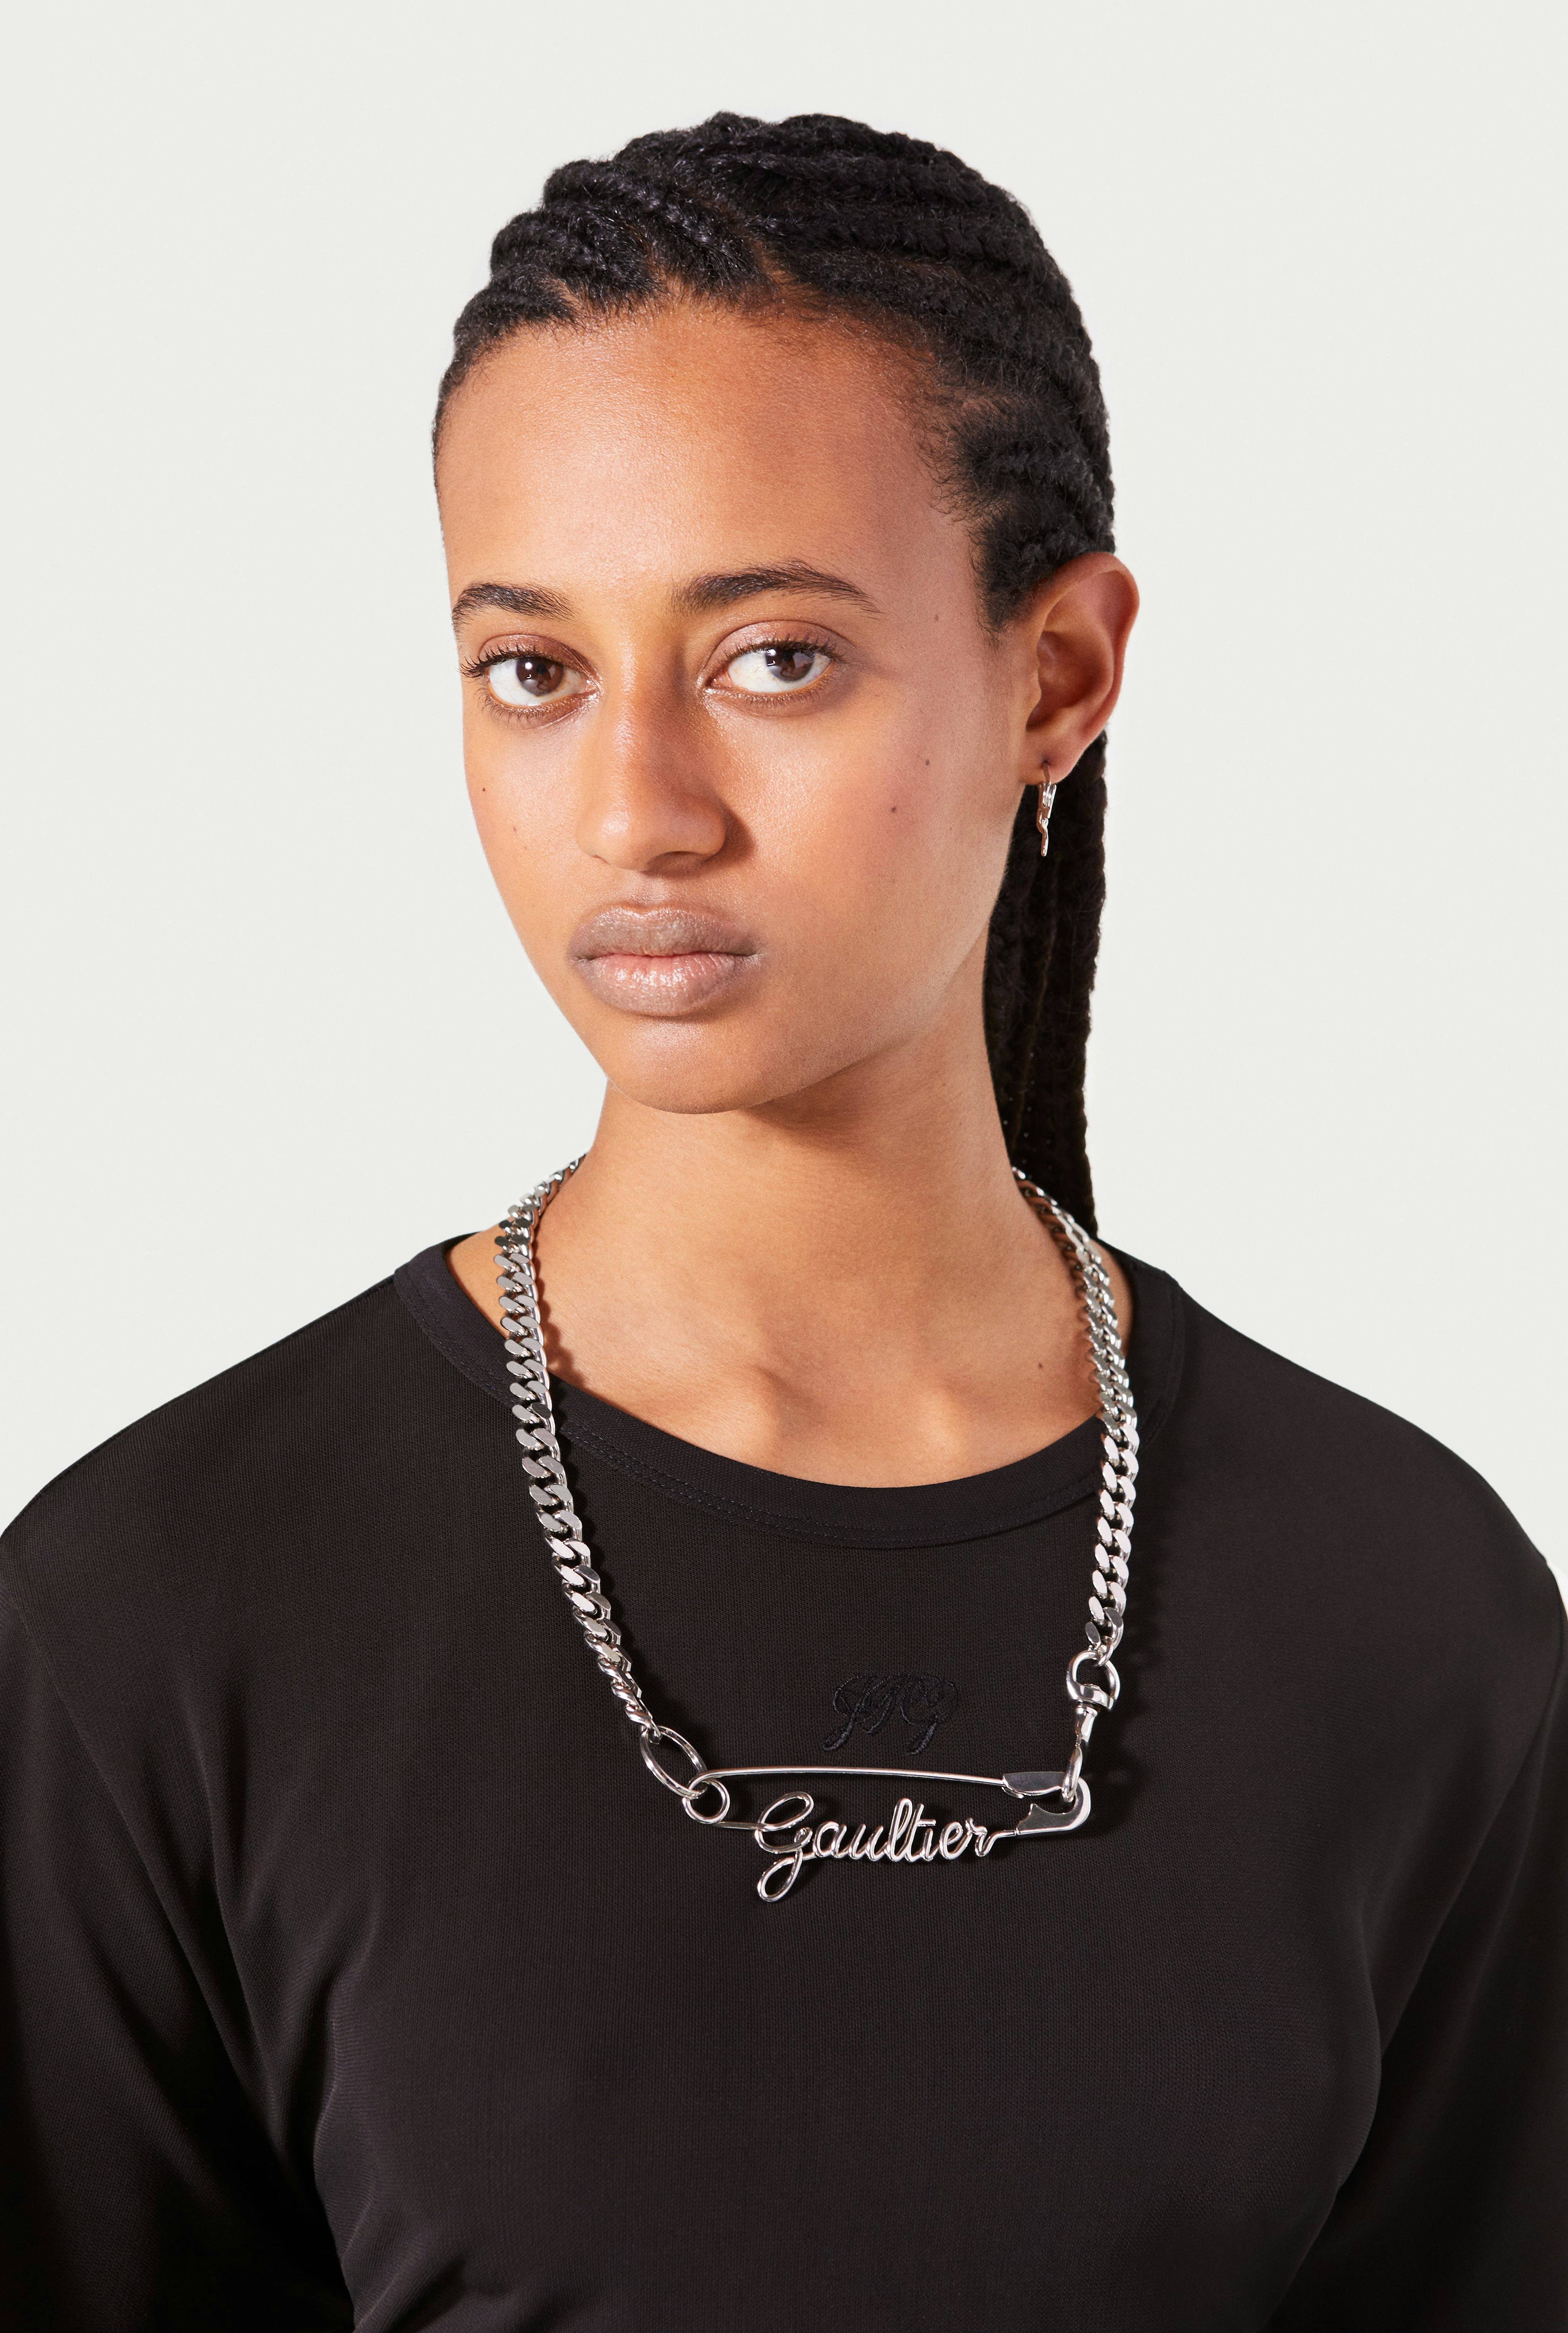 The Gaultier Safety Pin necklace 